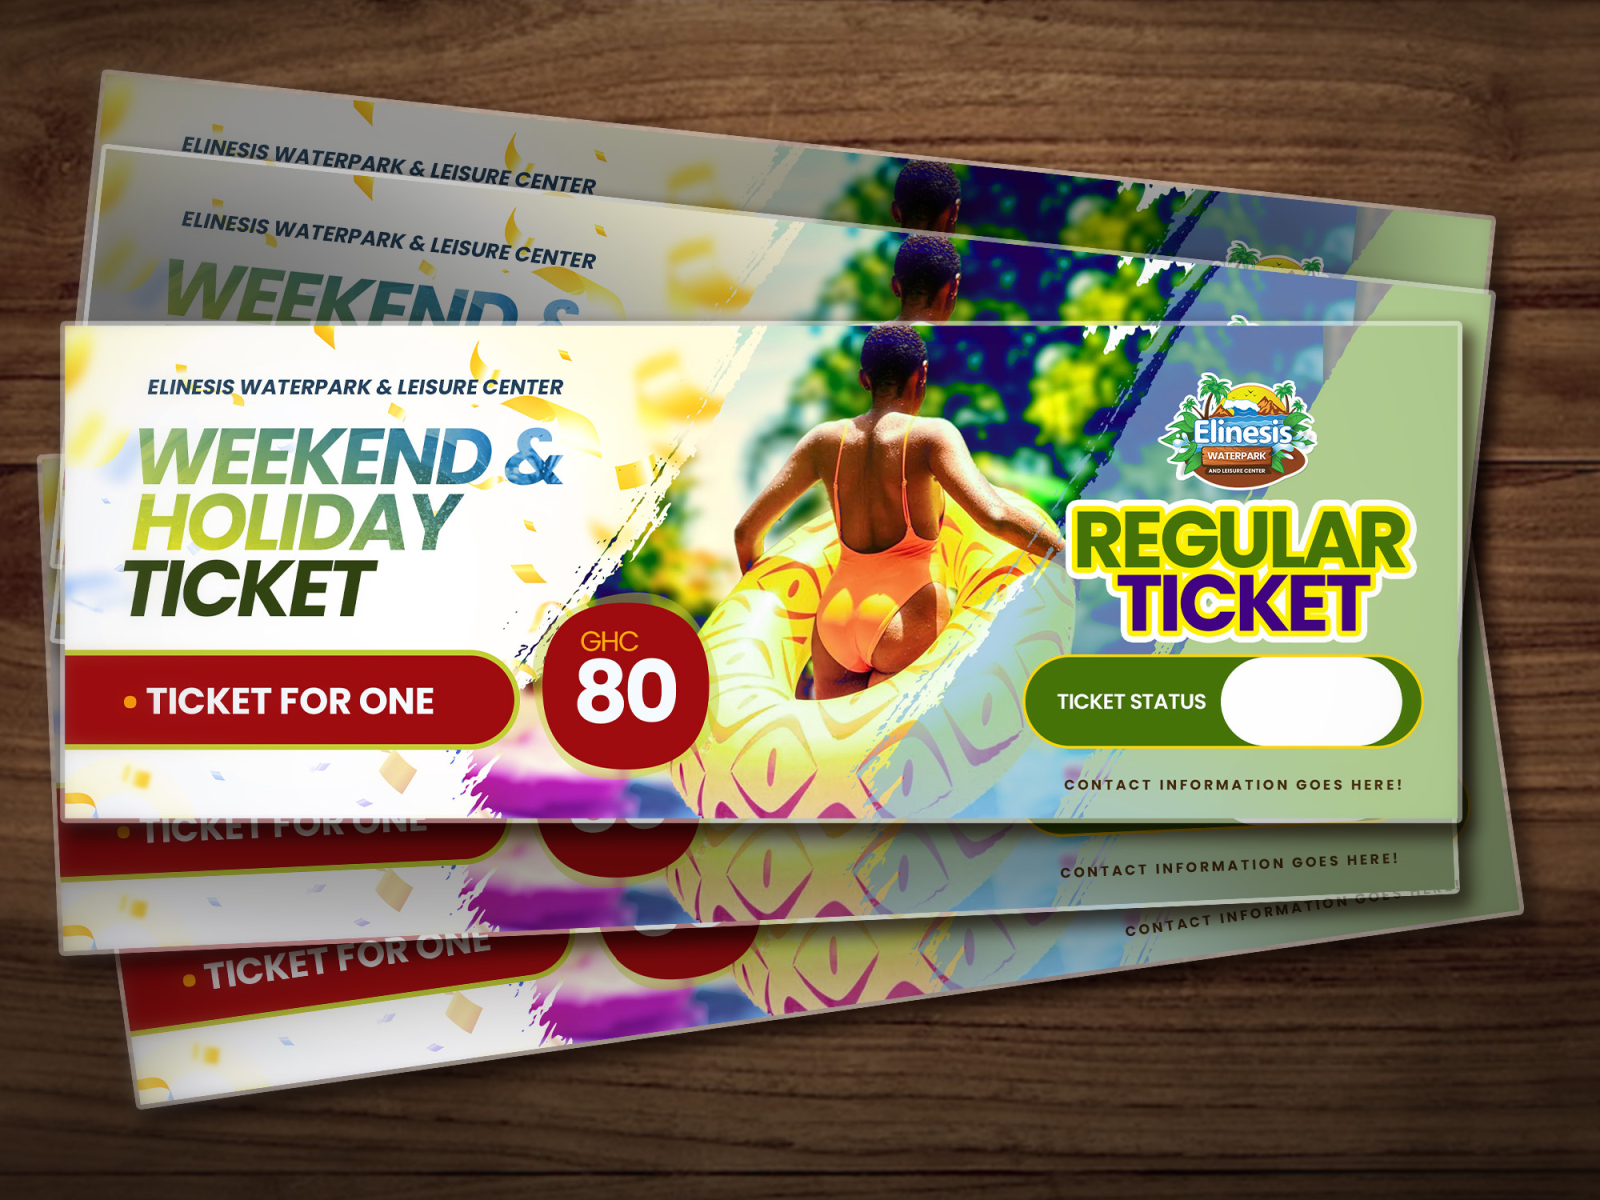 ELINESIS WATER PARK TICKET DESIGN by Thomas Dodoo on Dribbble